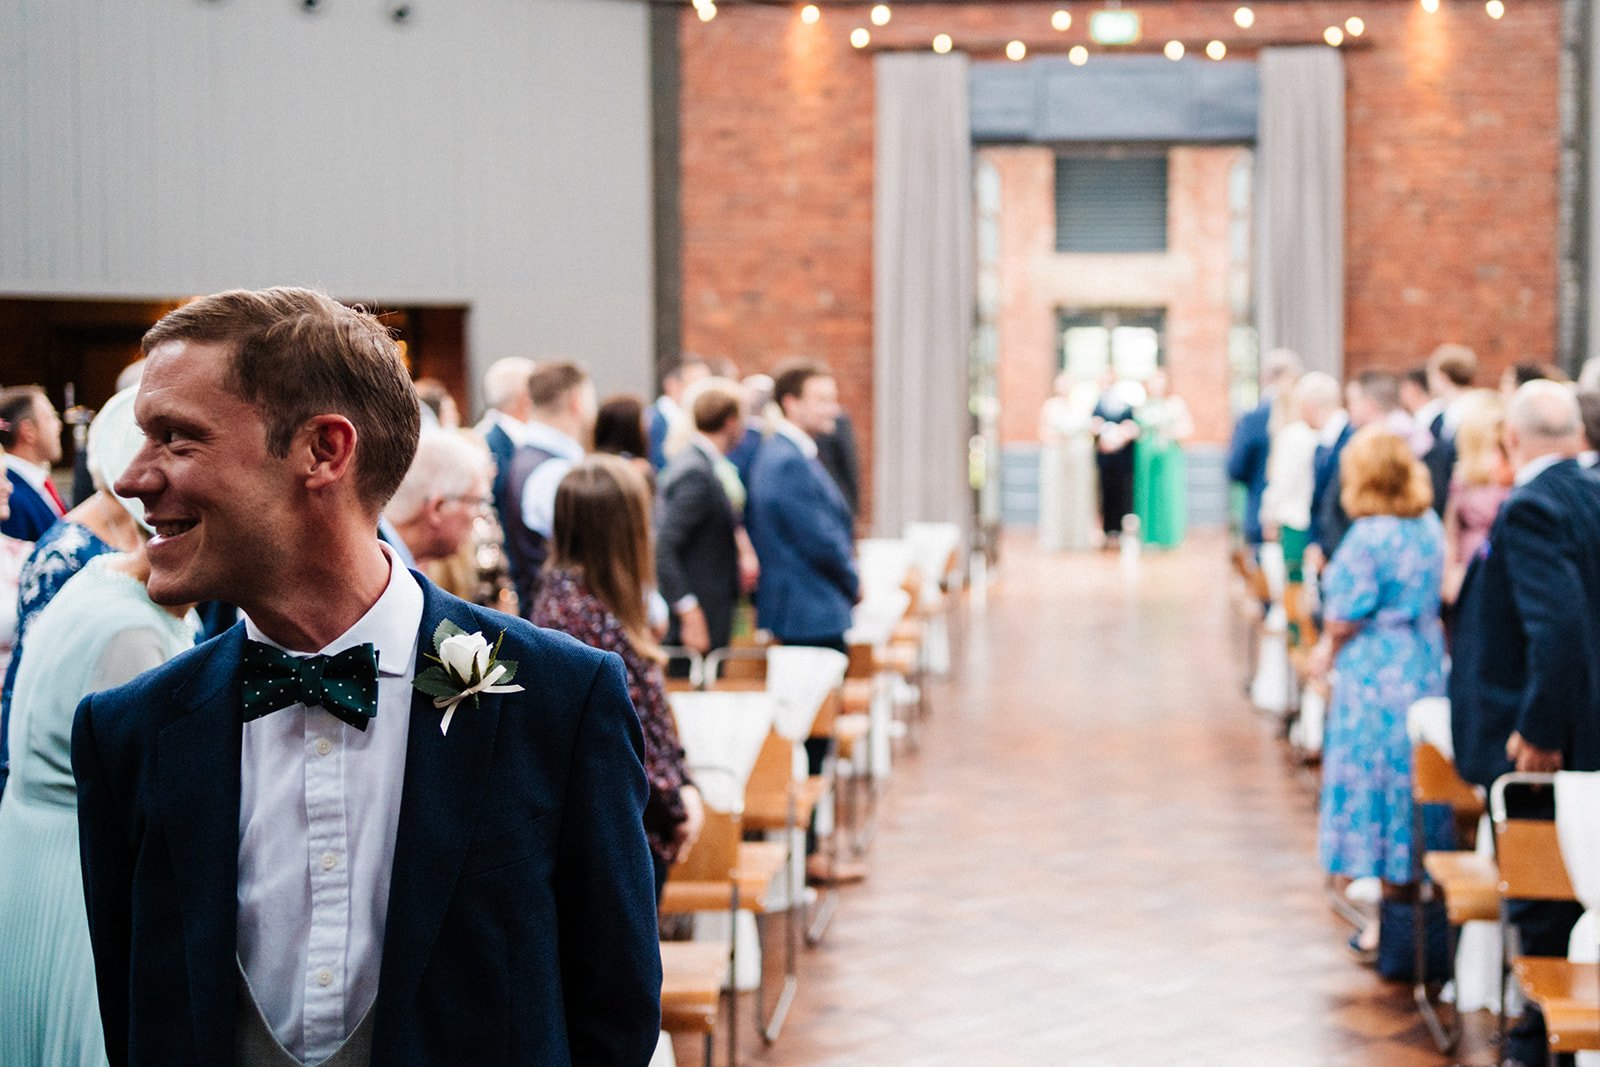 A groom looks to the side as the doors open behind him at the beginning of the wedding ceremony at Wylam Brewery in Newcastle